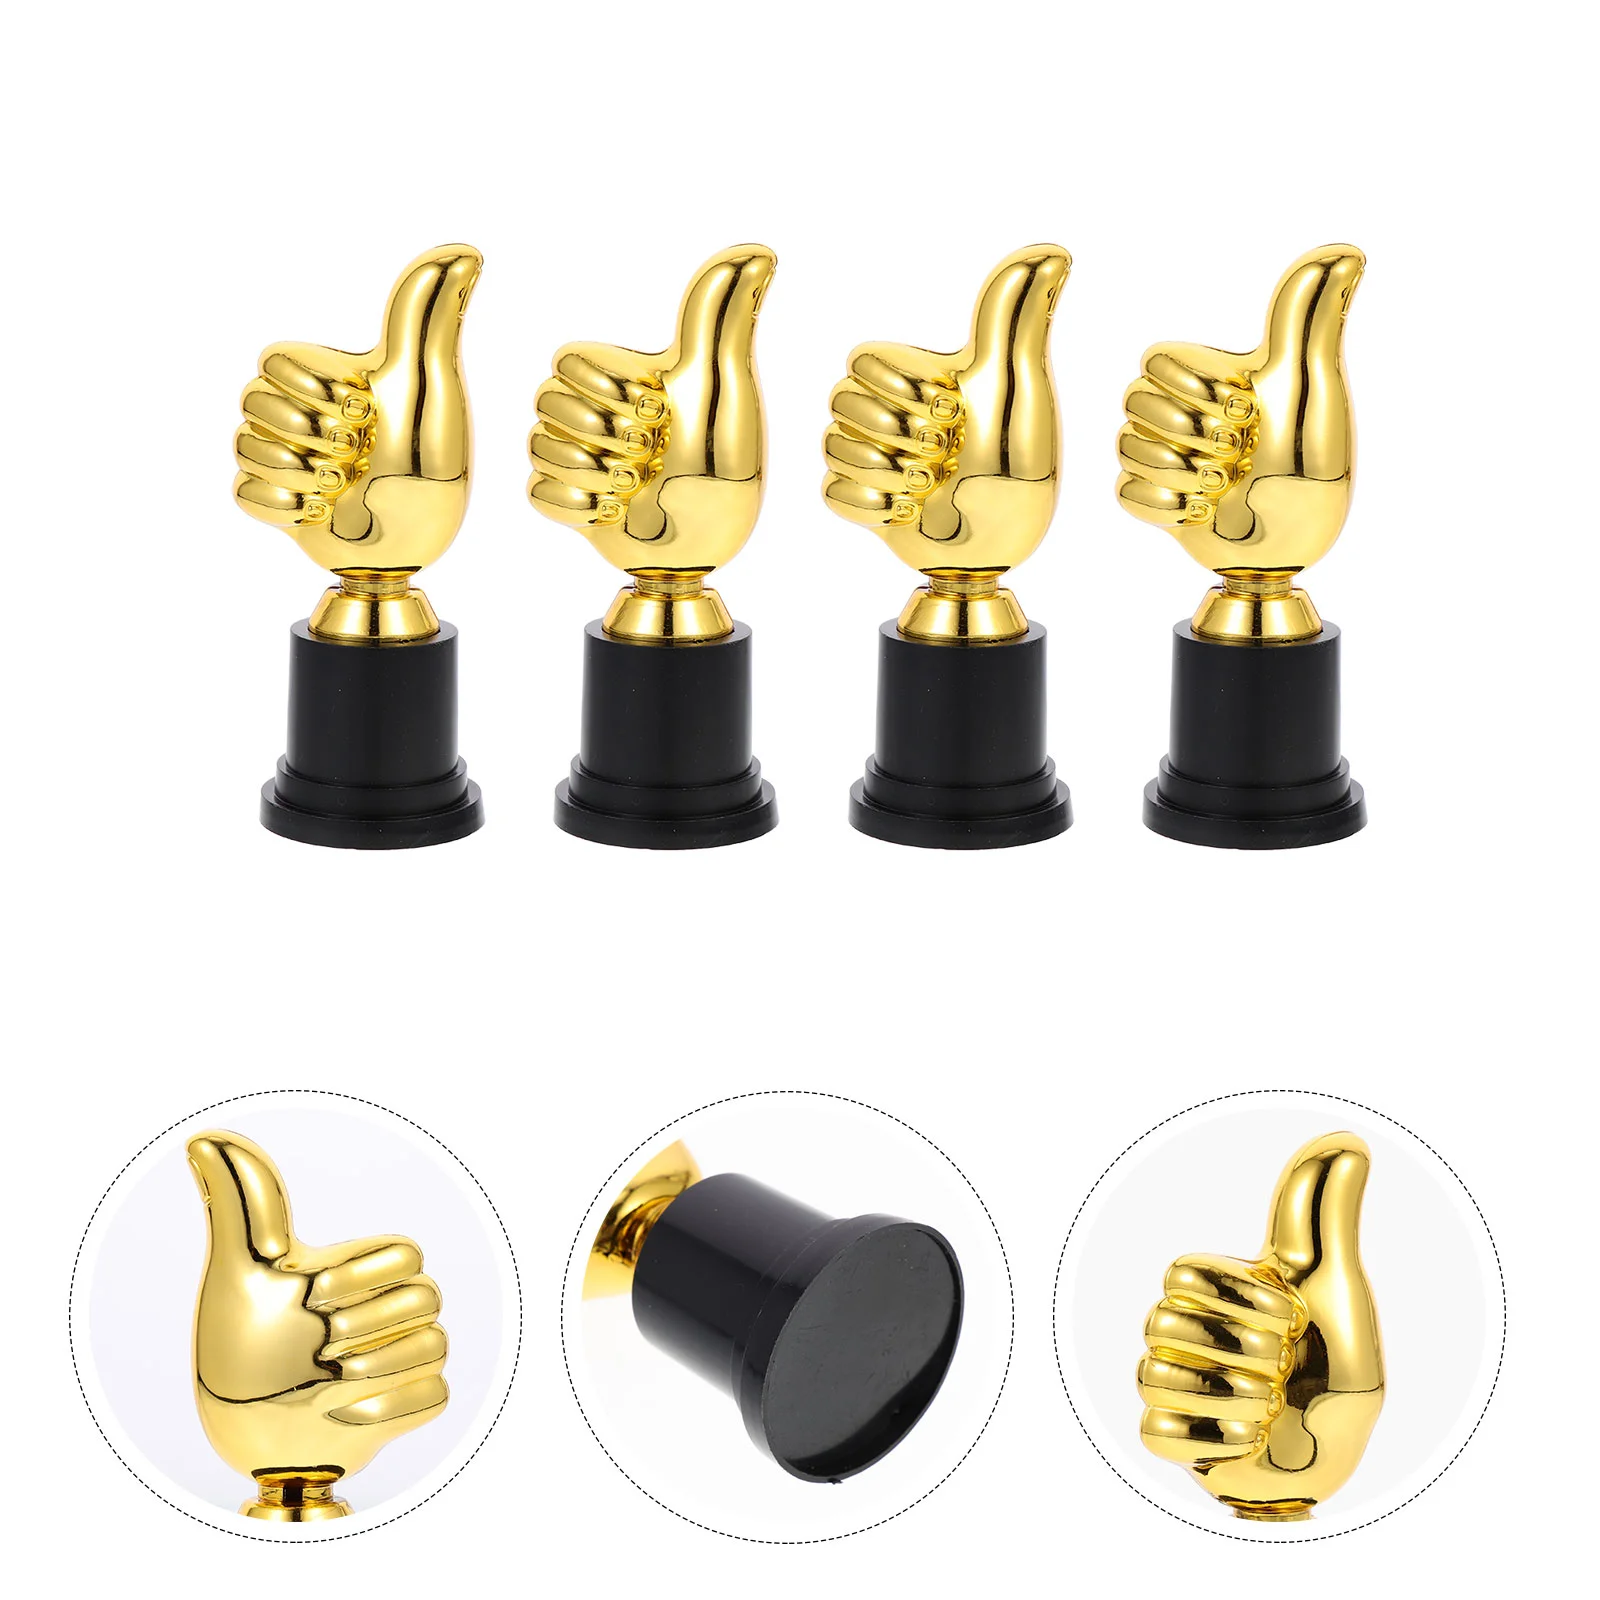 4 Pcs Winner Trophys Cup Basketball Gifts Plush Thumb Home Decoration Funny Competition Encourage